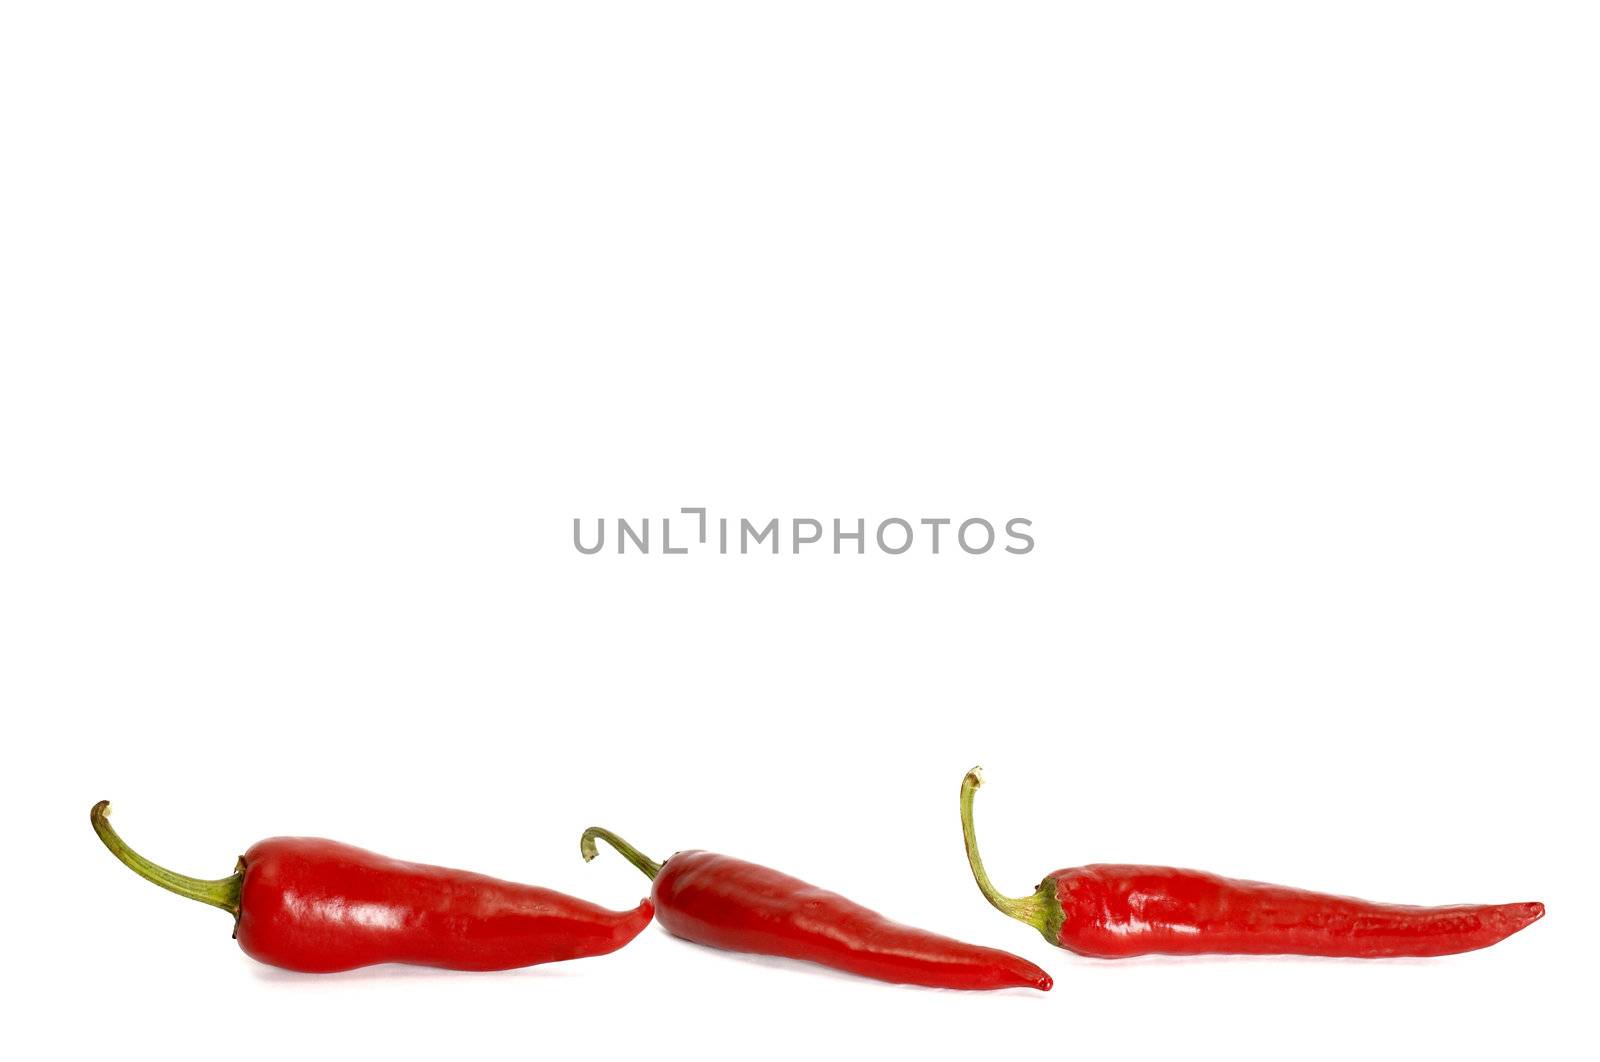 An image of three red peppers